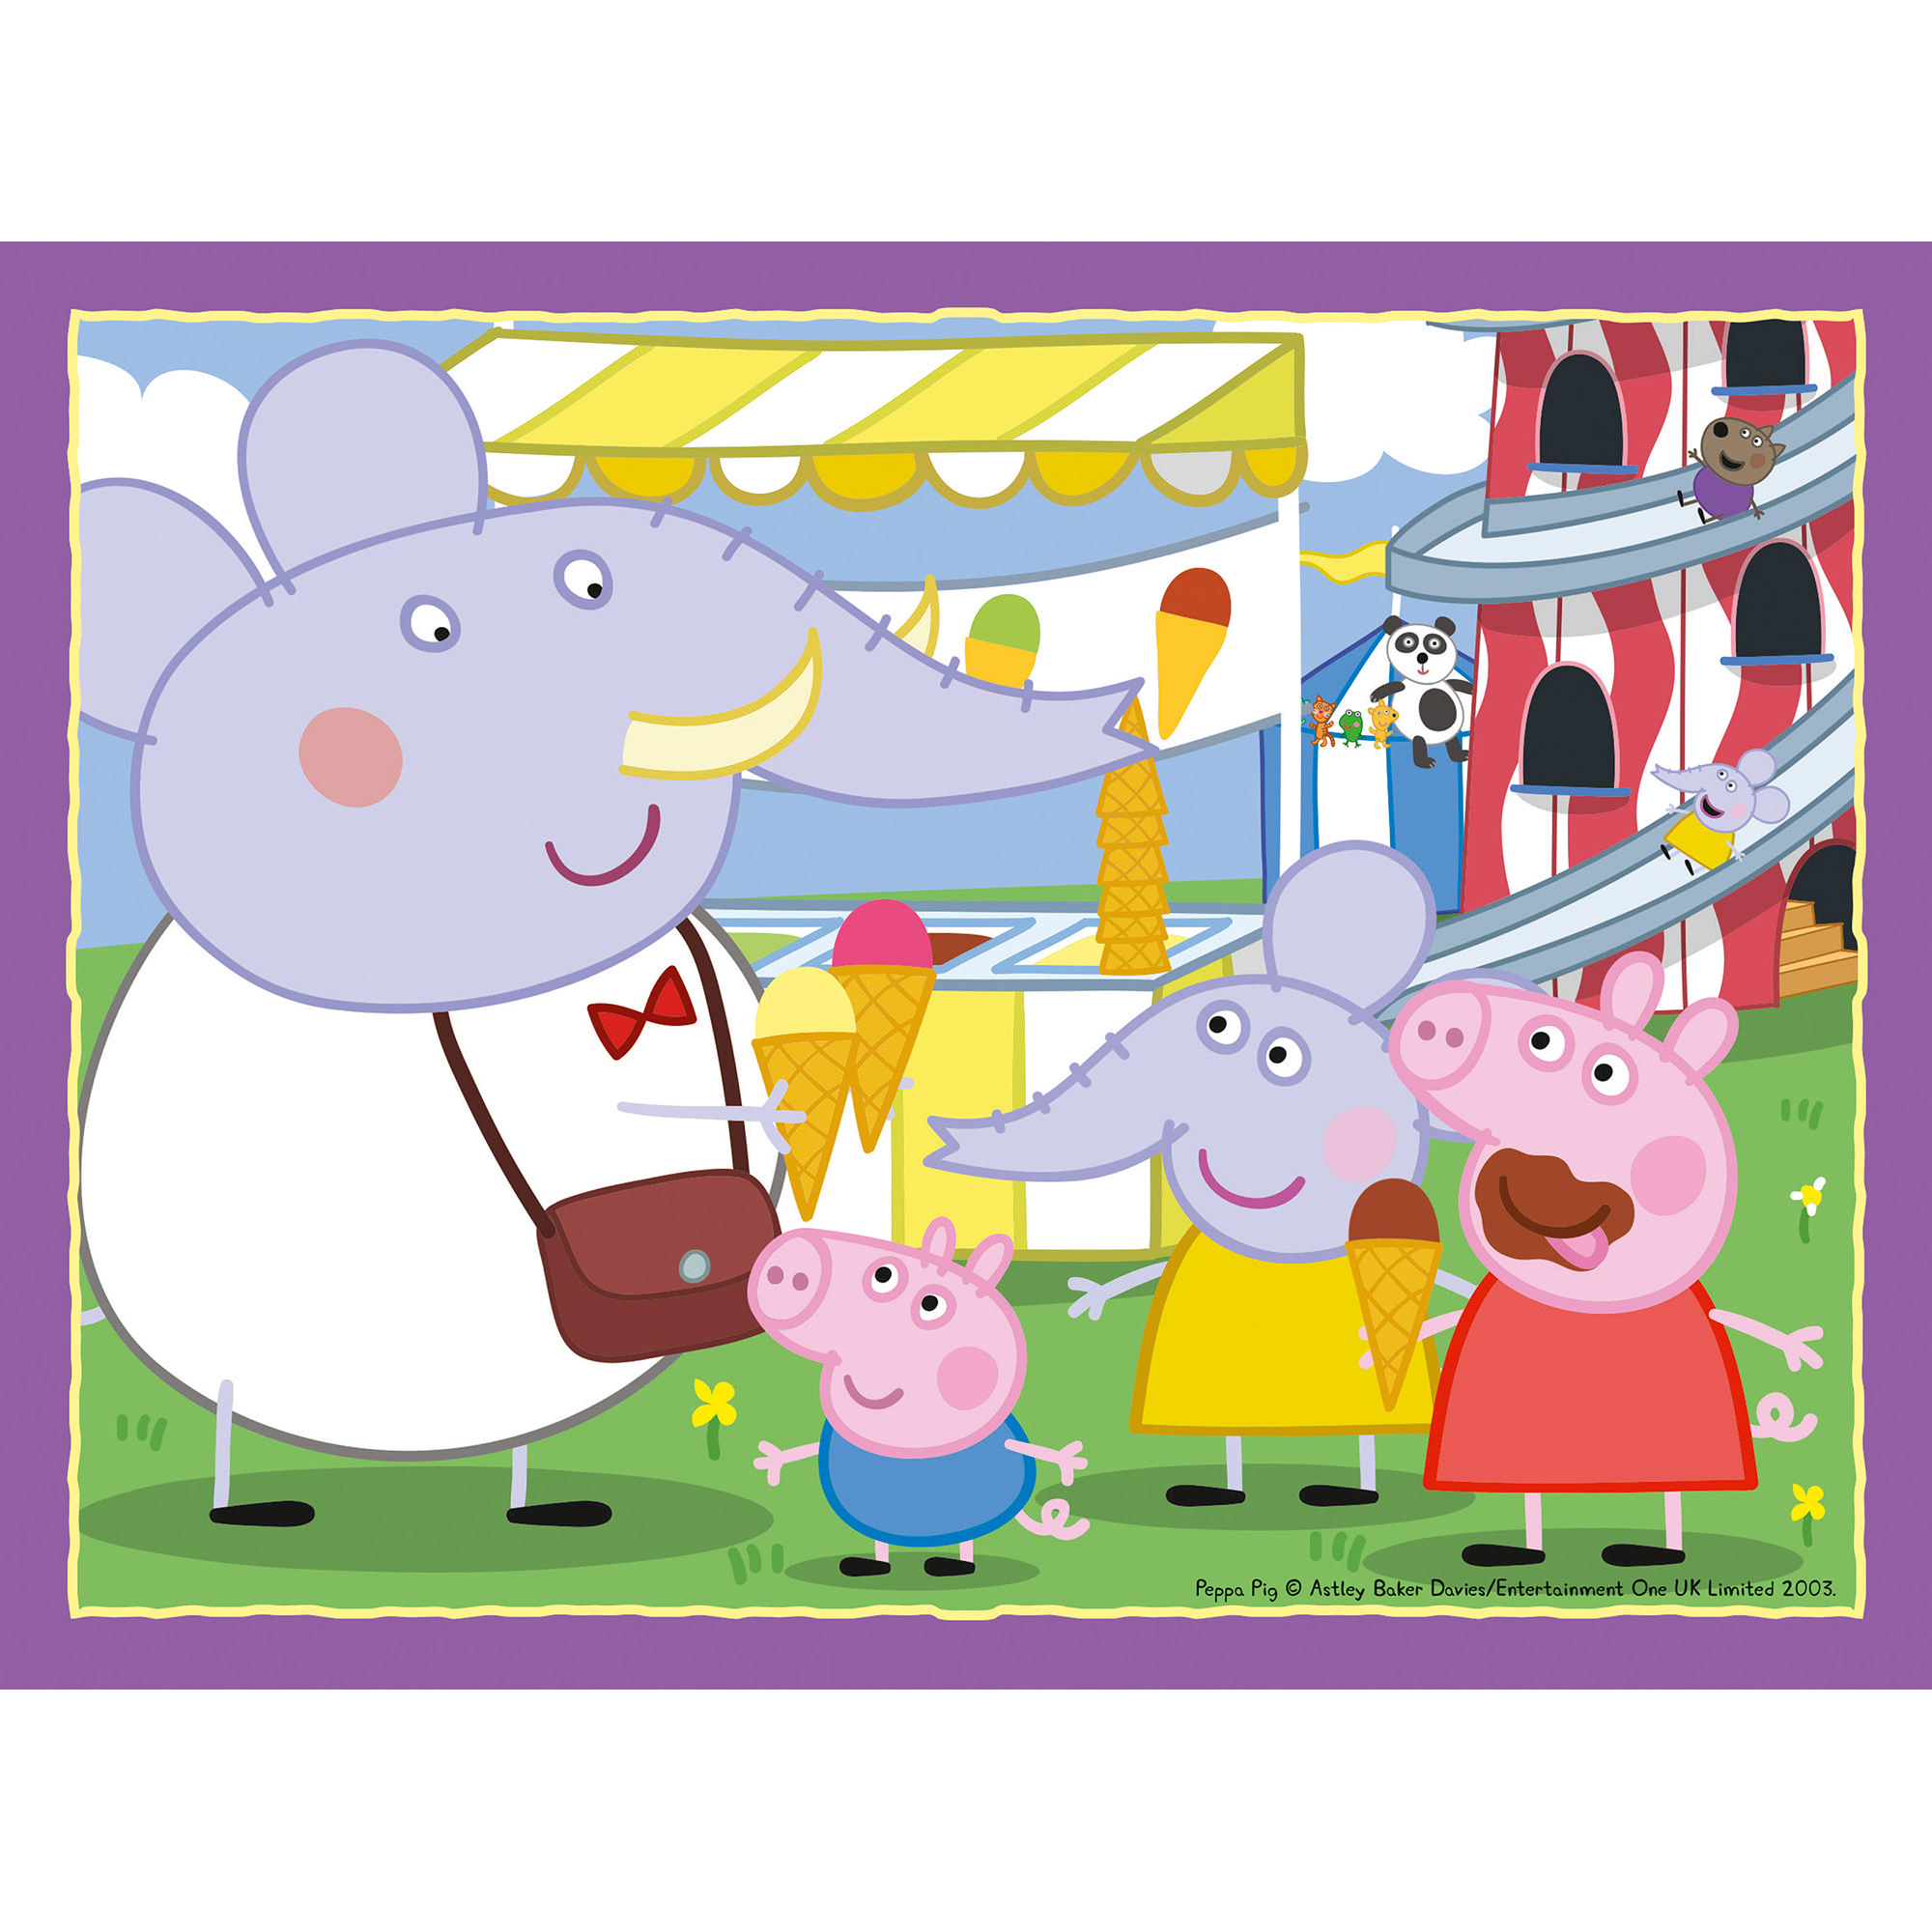 'NEW Peppa Pig 4 Large Shaped Jigsaw Puzzles 10,12,14,16pc Four Bright And Colo 